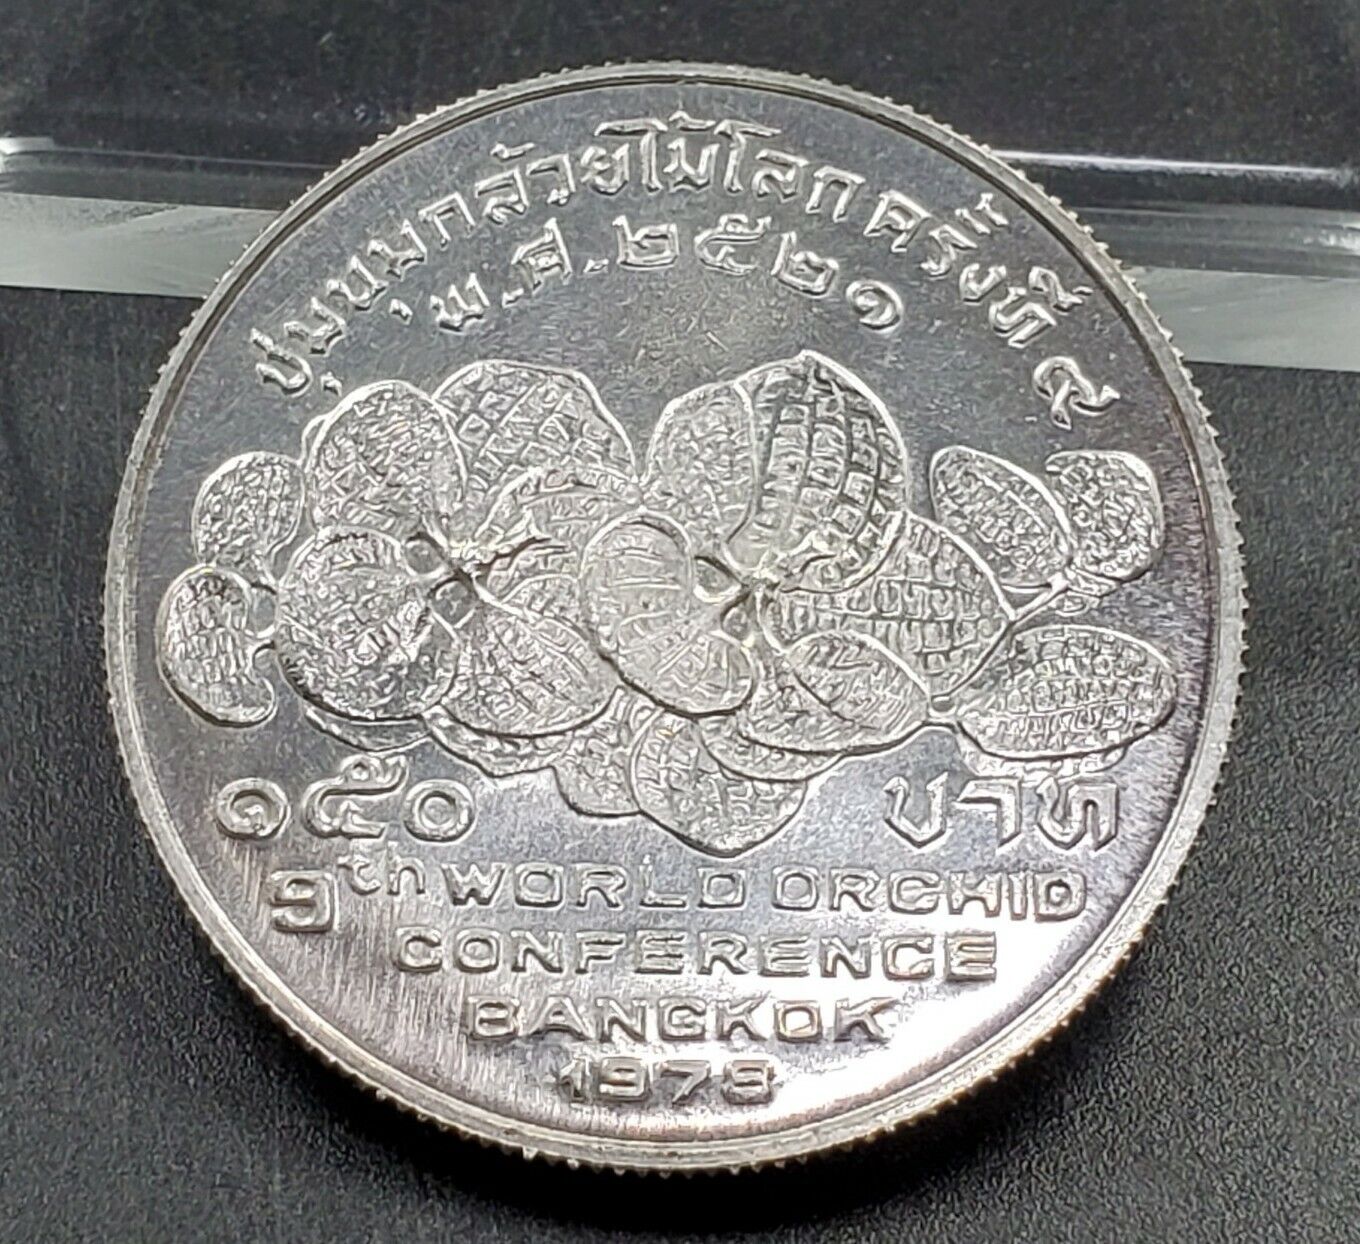 1978 Thailand Silver 150 Baht "9th World Orchid Conference"  BU